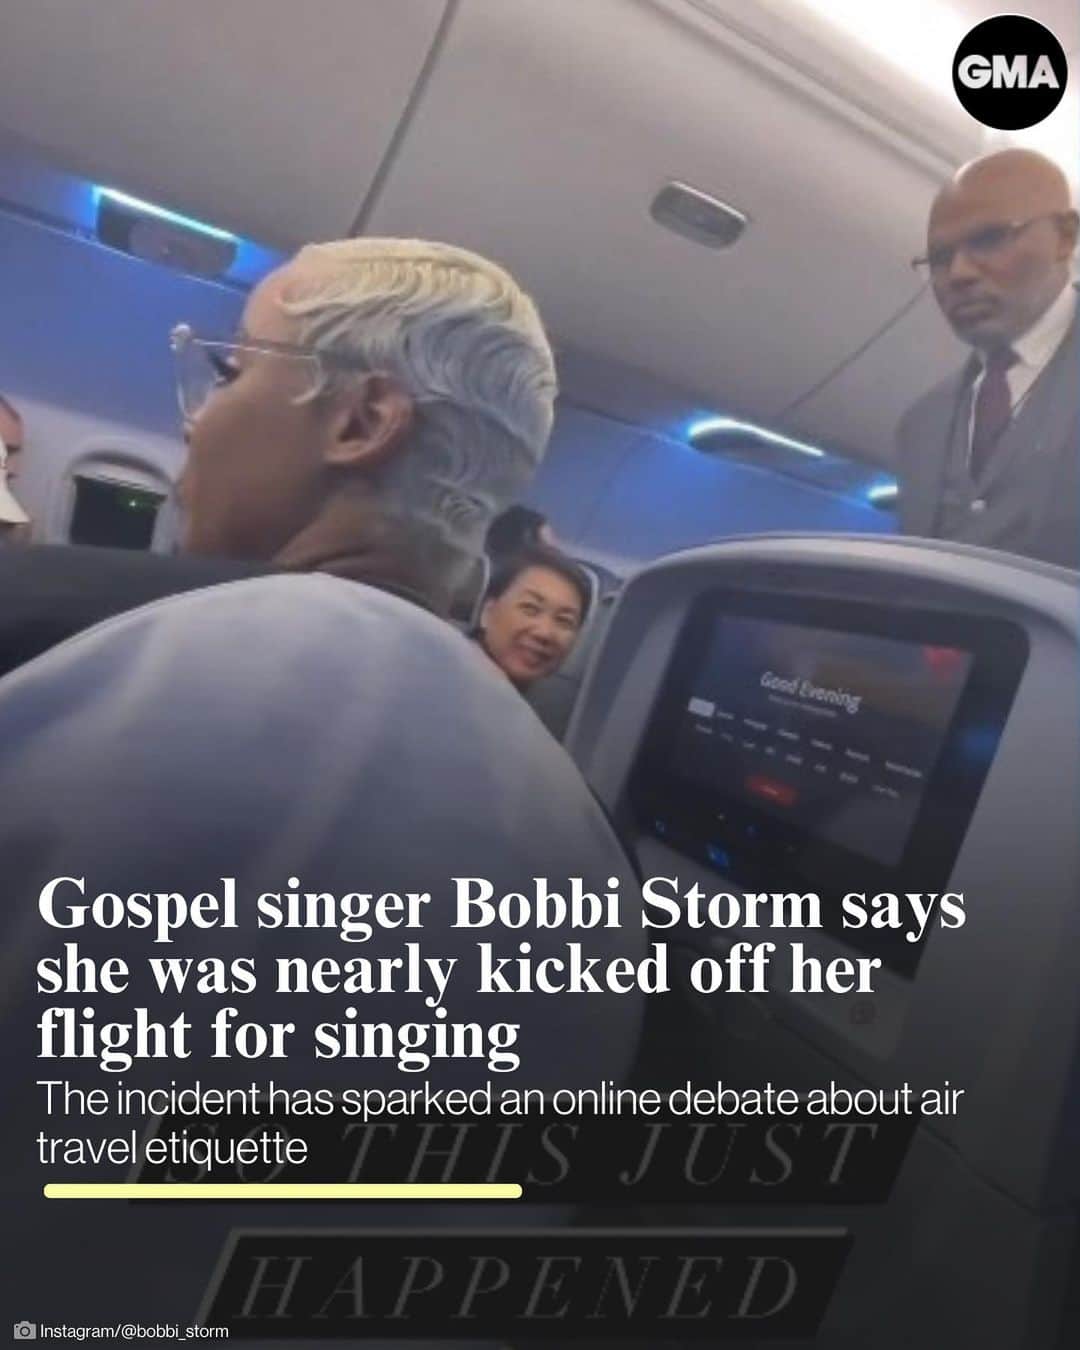 Good Morning Americaのインスタグラム：「Gospel singer Bobbi Storm says she was nearly kicked off of a Delta flight for singing — and documented her encounter with a flight attendant on Instagram.   The singer, who had just found out she was Grammy-nominated, began singing on her flight and was threatened with removal after she refused to stop.   The interaction is raising questions about air travel etiquette. What are your thoughts?」